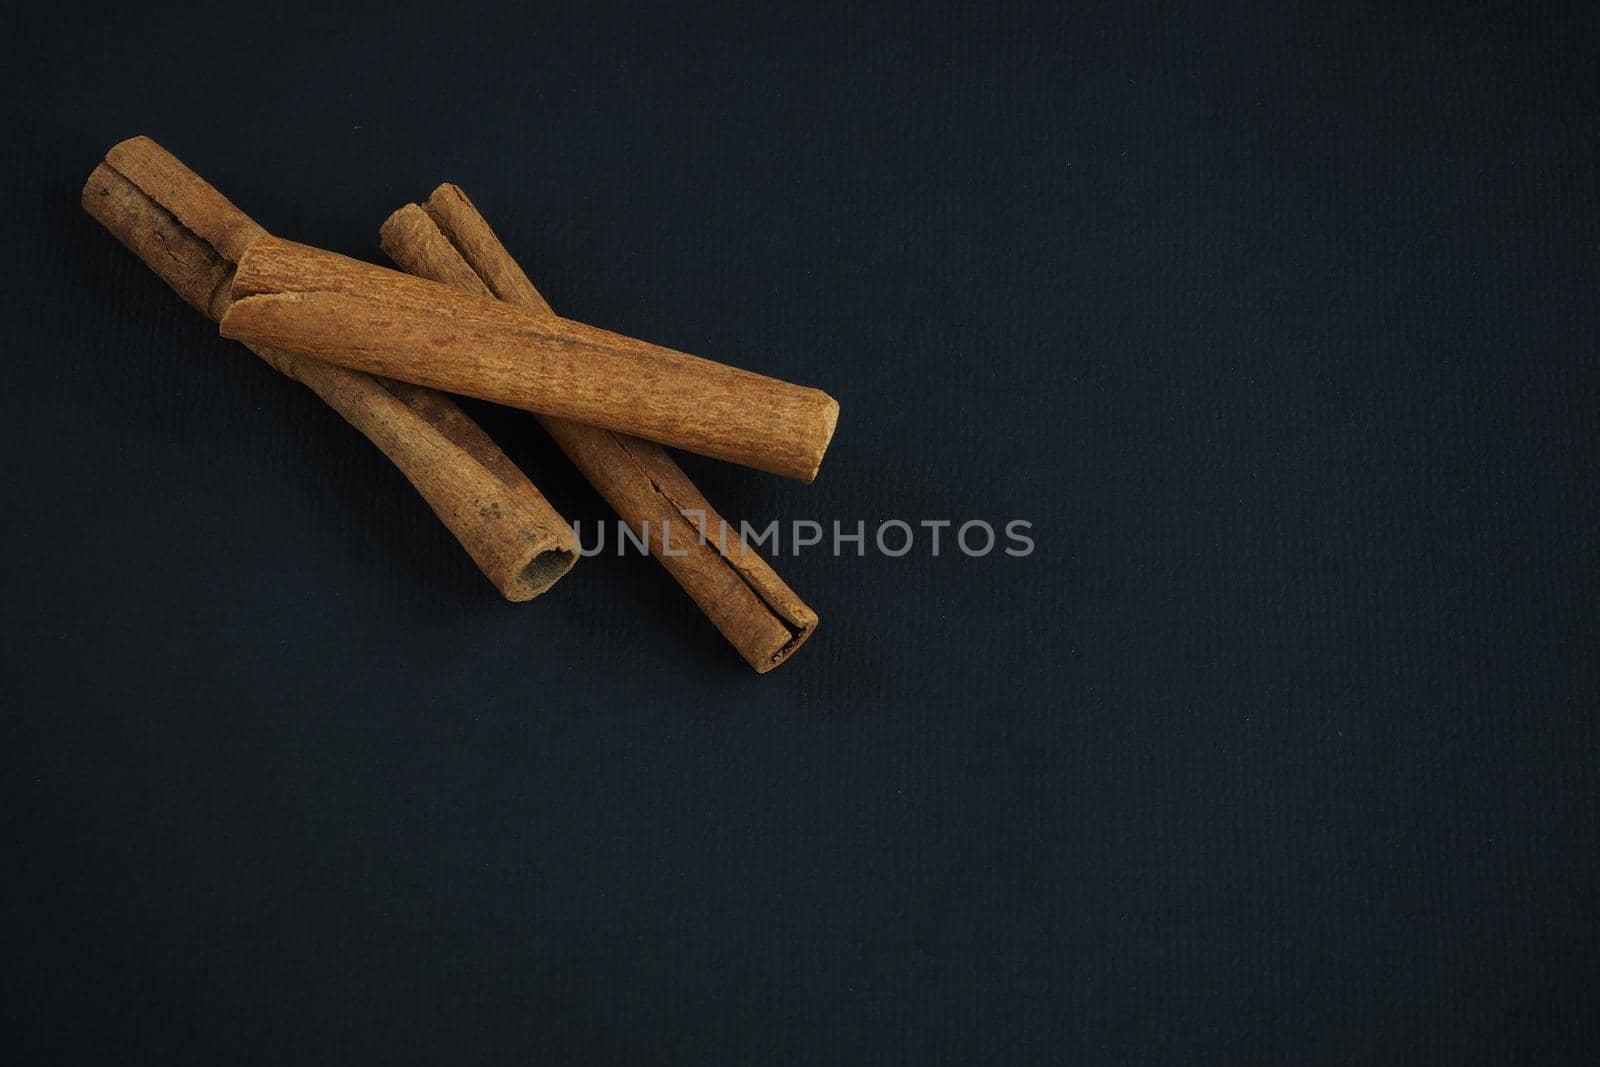 Ingredients and spices for pastries and drinks. Cinnamon sticks on a black background.